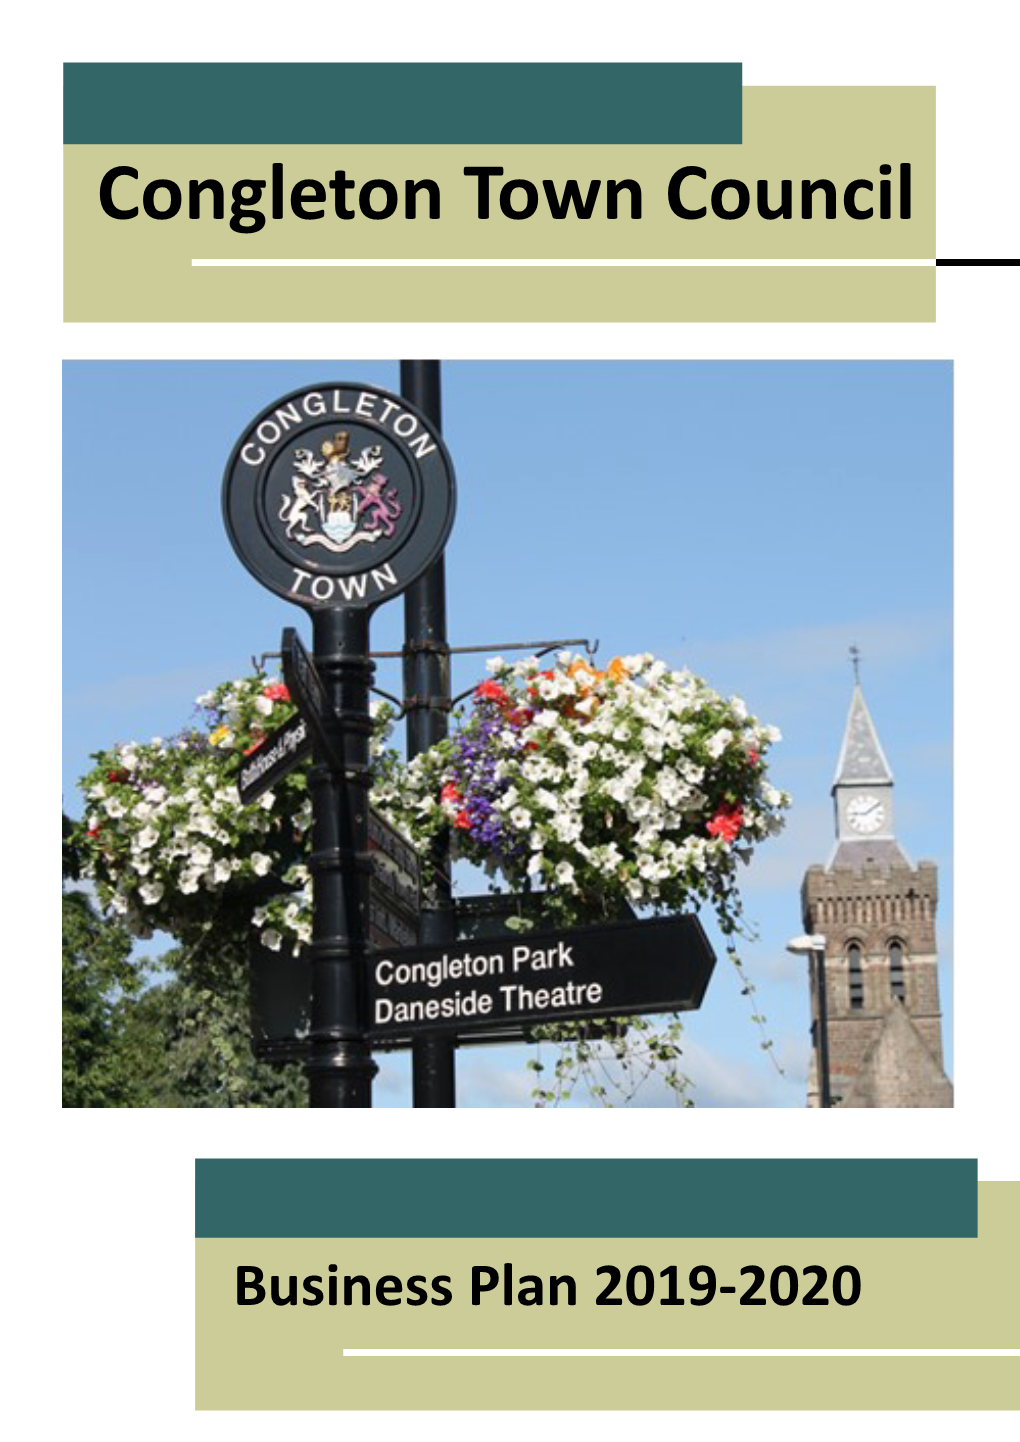 Congleton Town Profile: West Ward Data Provided by Cheshire East Council